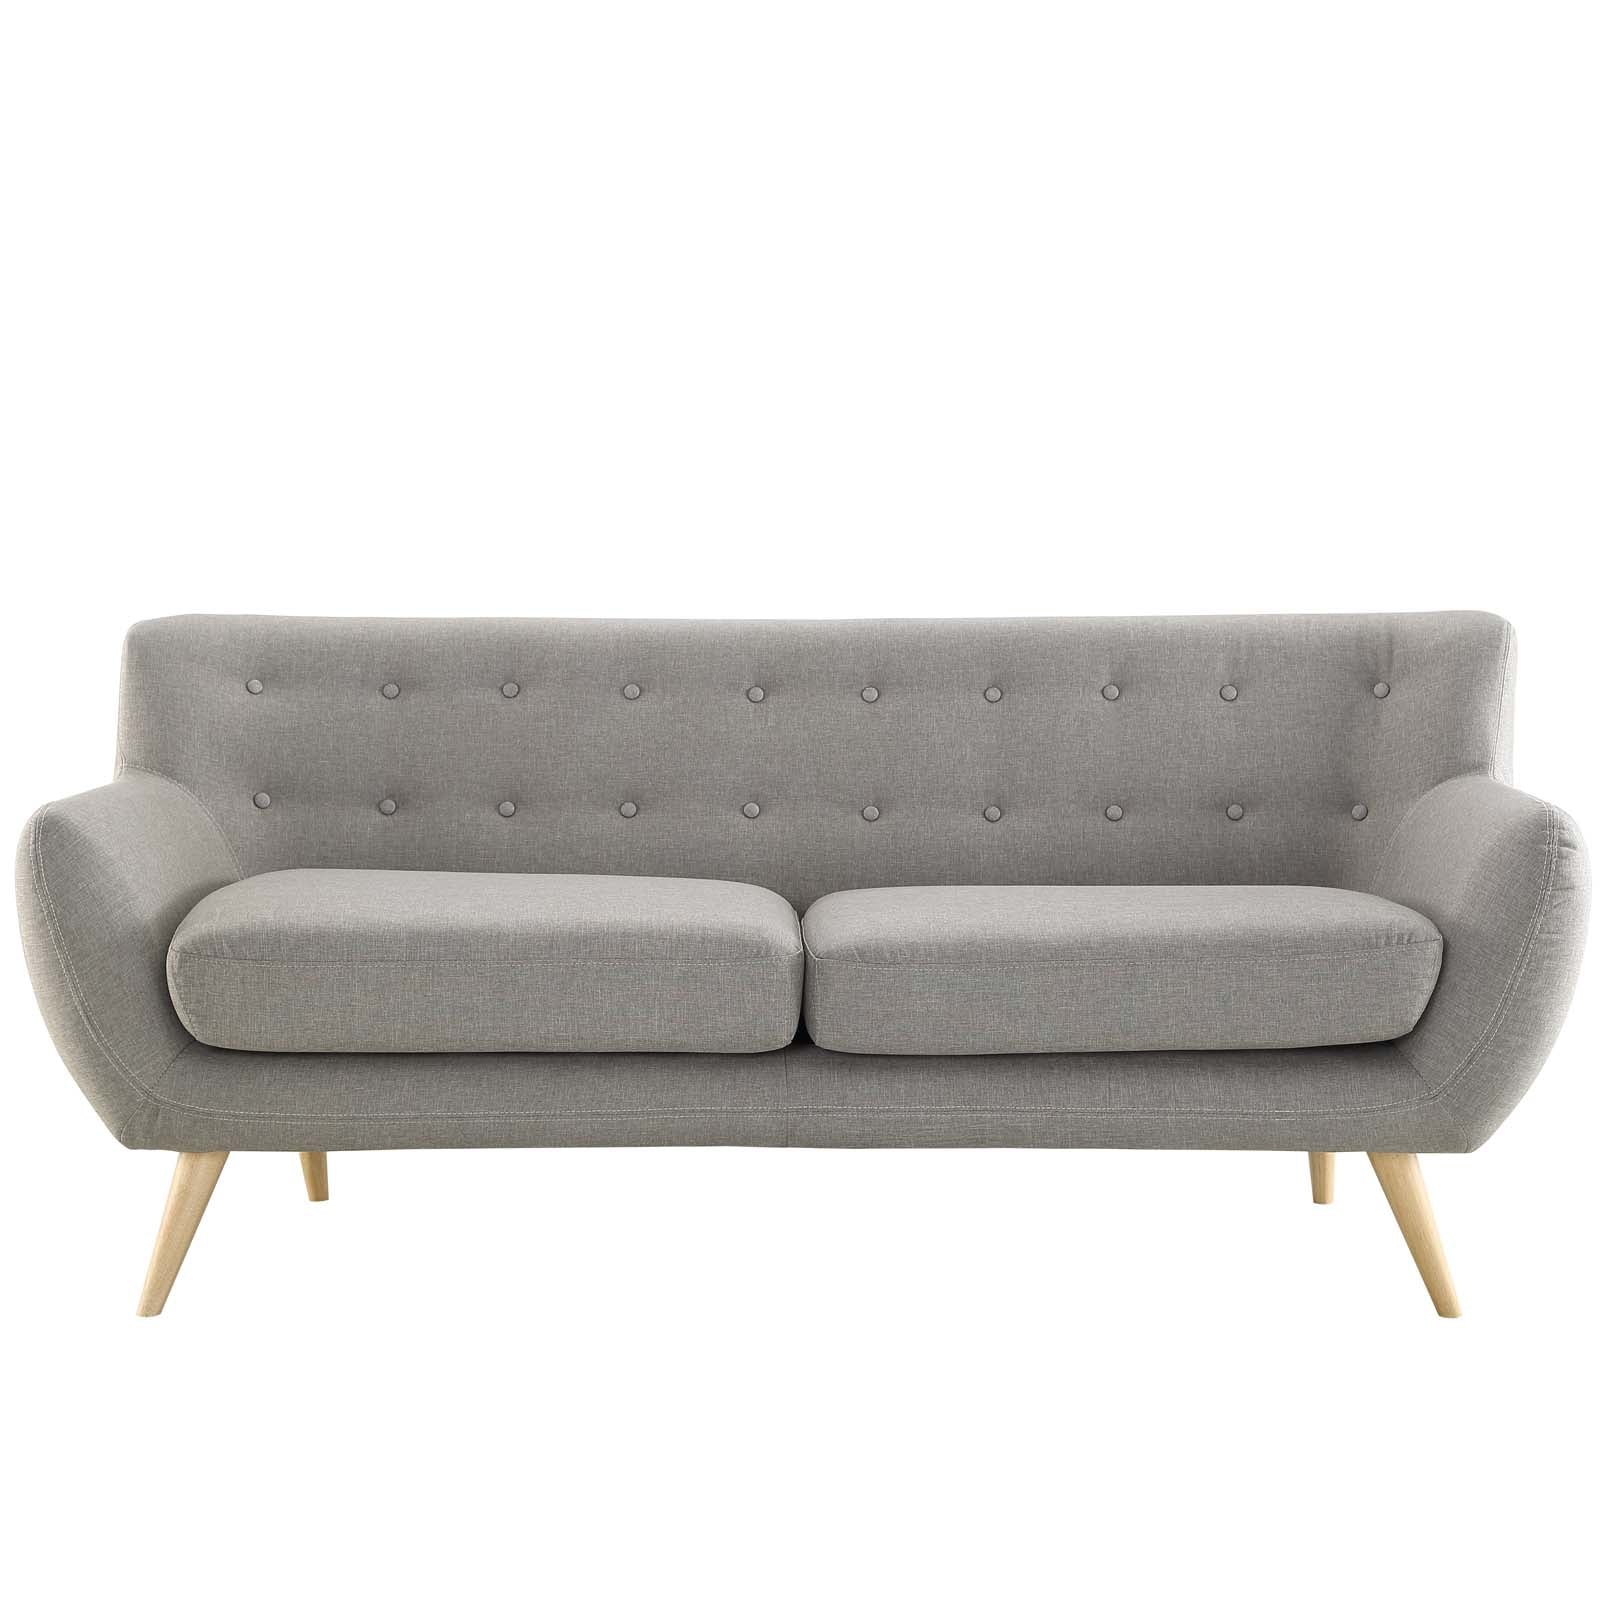 Modway Sofas & Couches - Remark Upholstered Fabric Sofa Light Gray